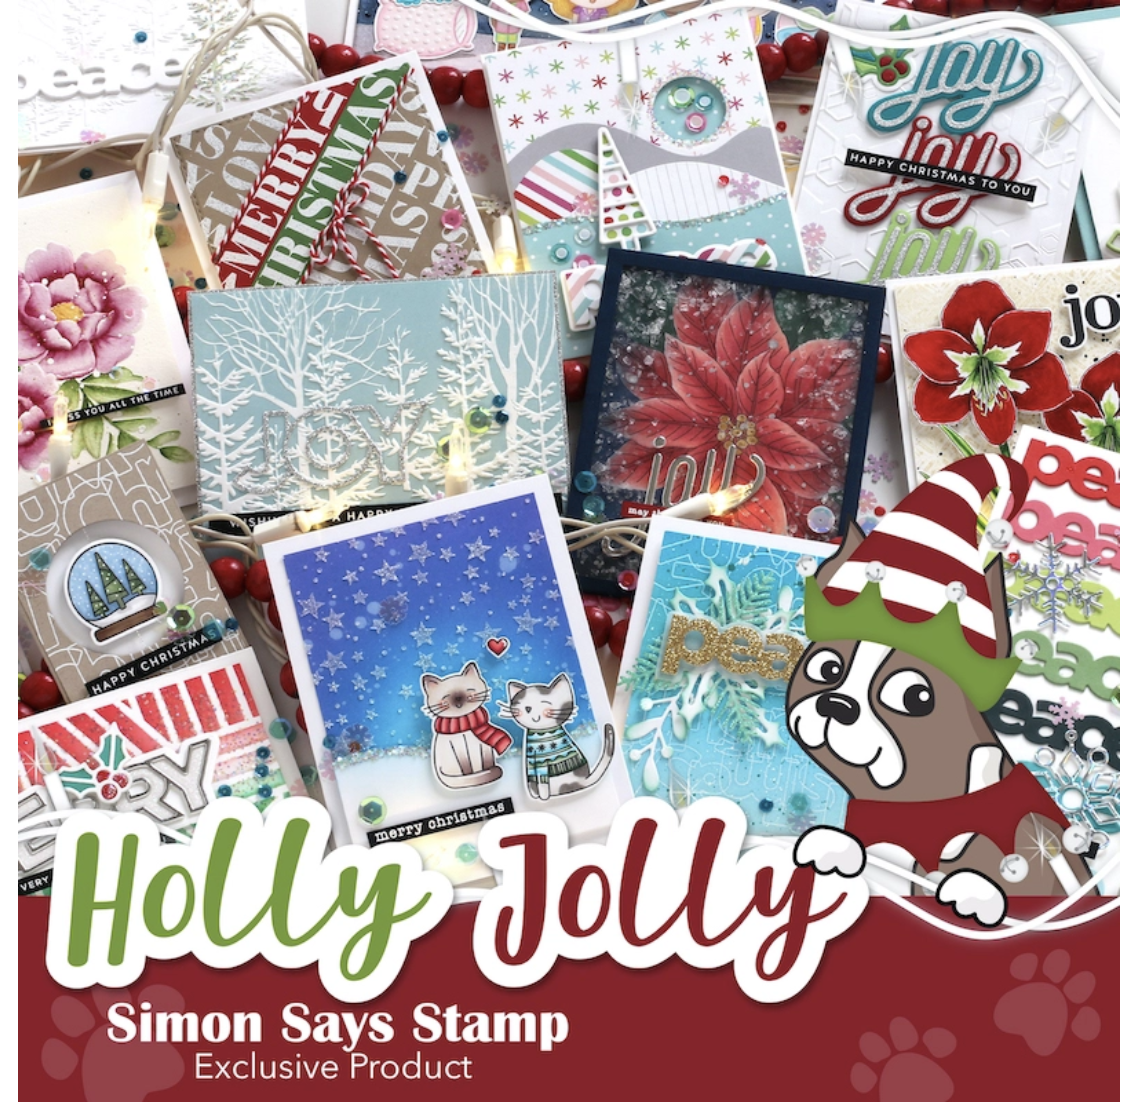 Simon Says Stamp, Holly Jolly Exclusive Product